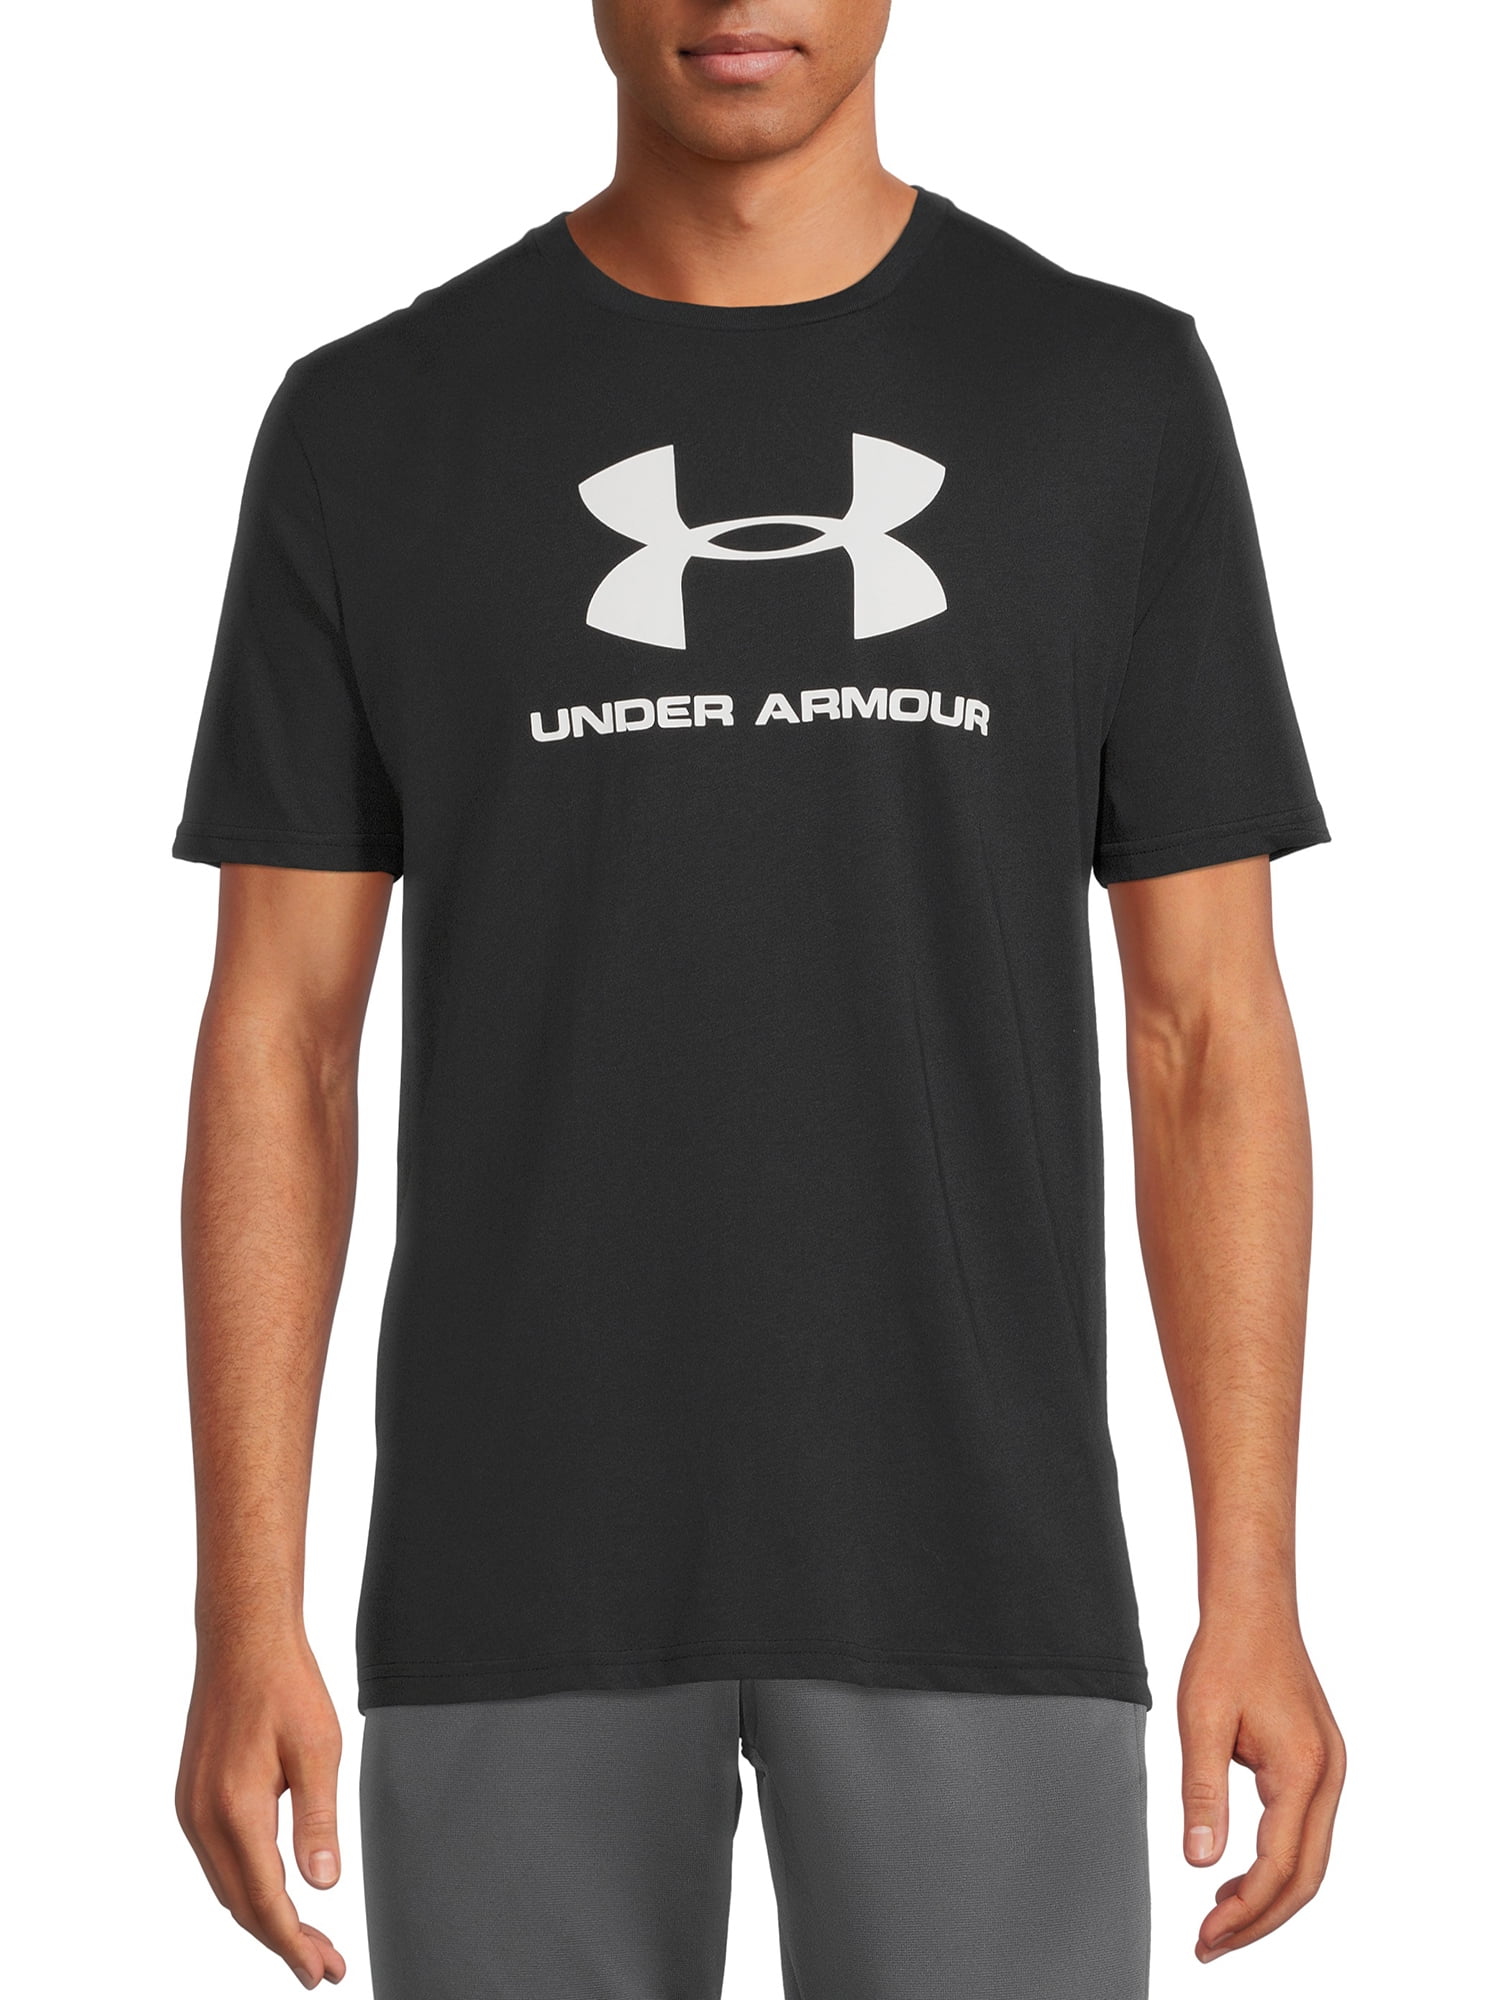 Under Armour Men's and Big Men's UA Sportstyle Logo T-Shirt with Short  Sleeves, Sizes up to 2XL 